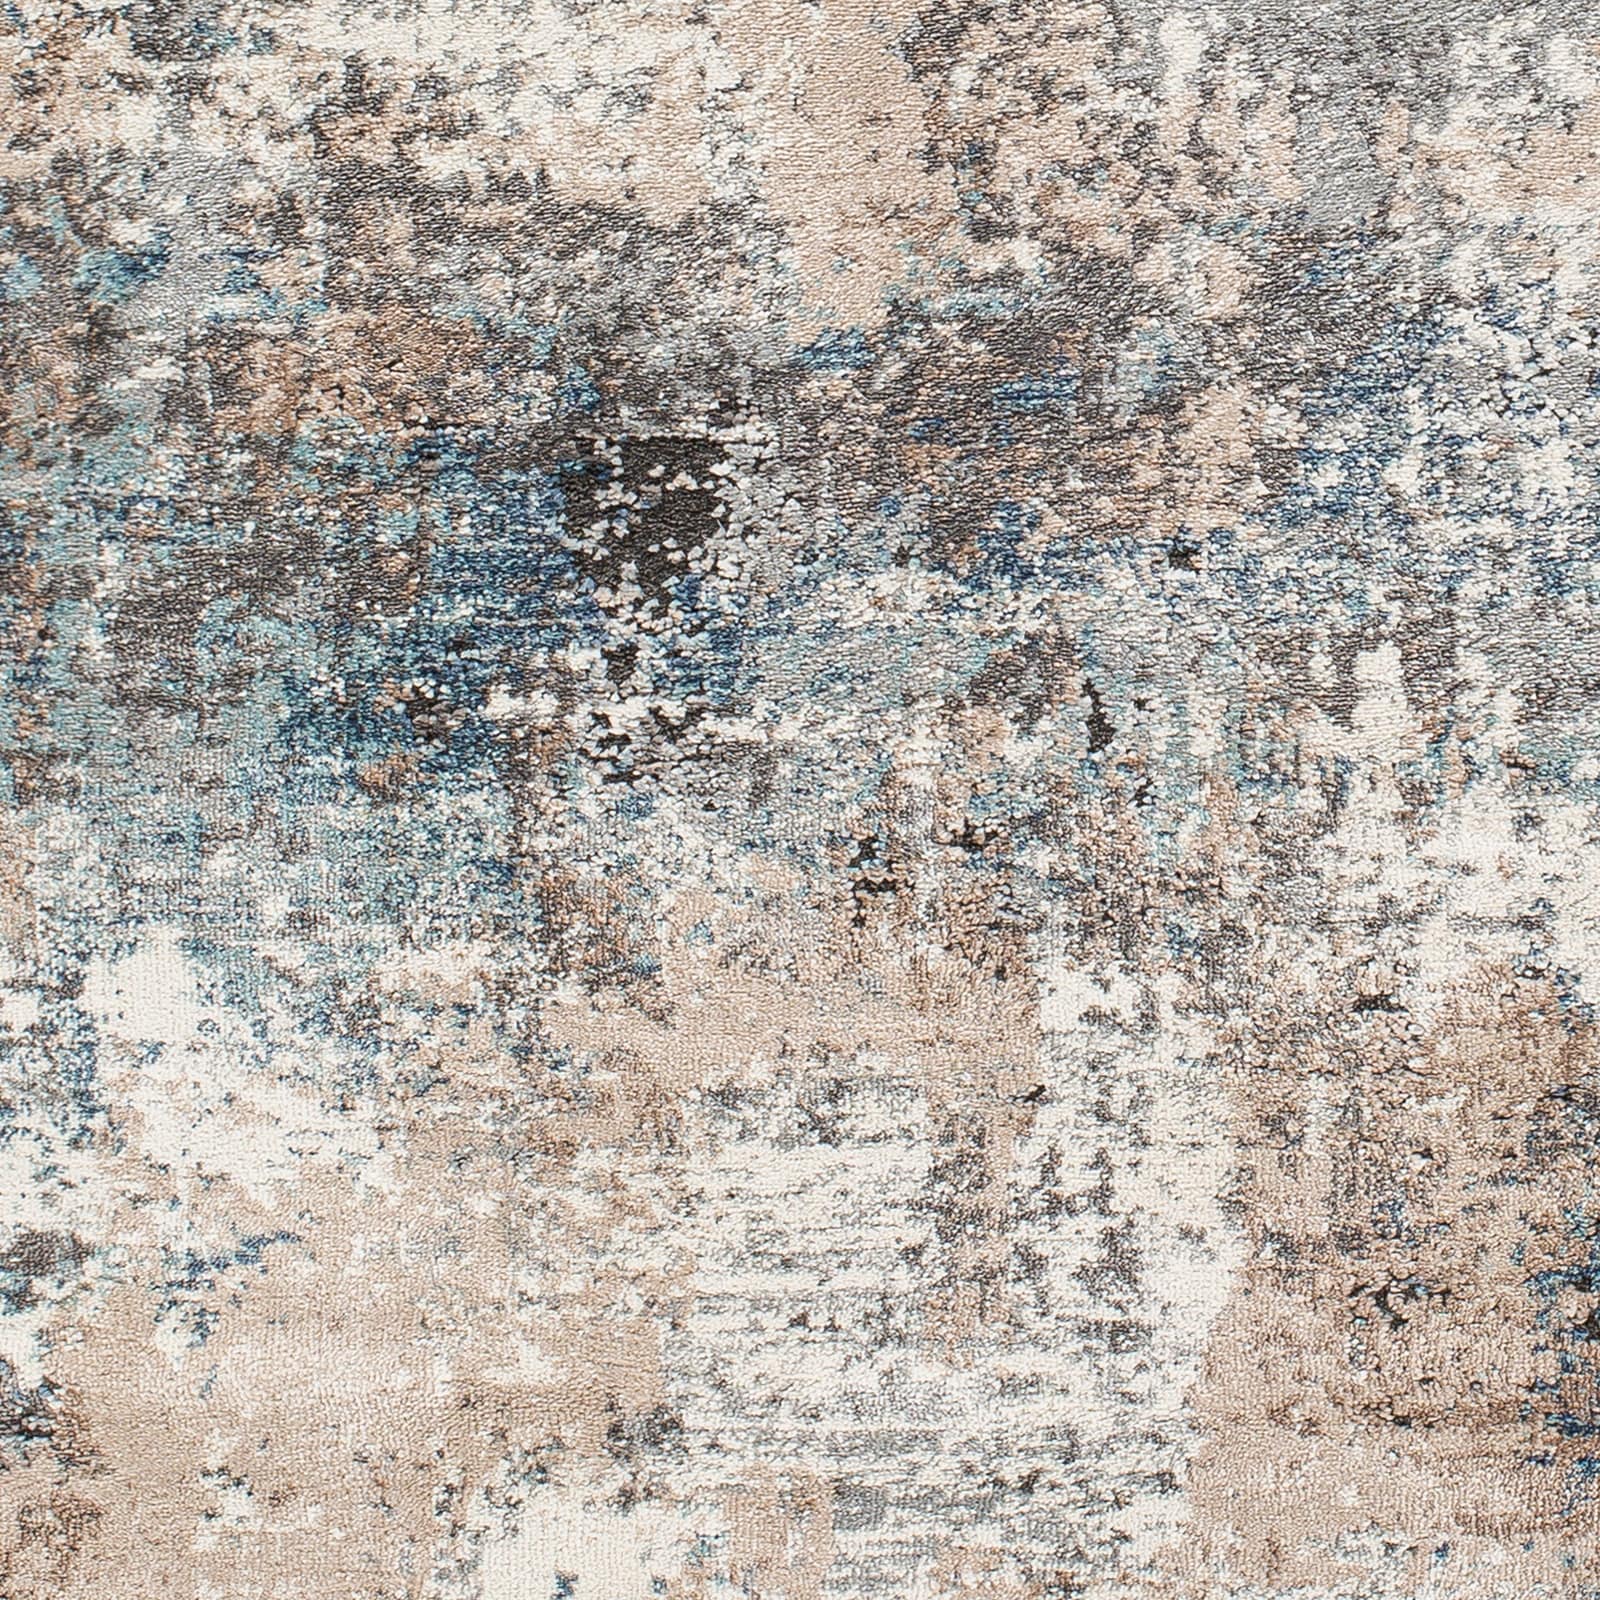 https://ak1.ostkcdn.com/images/products/is/images/direct/3a976909294a26ed7dfebac459e3abd549e49ece/Cansu-Rustic-Abstract-Area-Rug.jpg